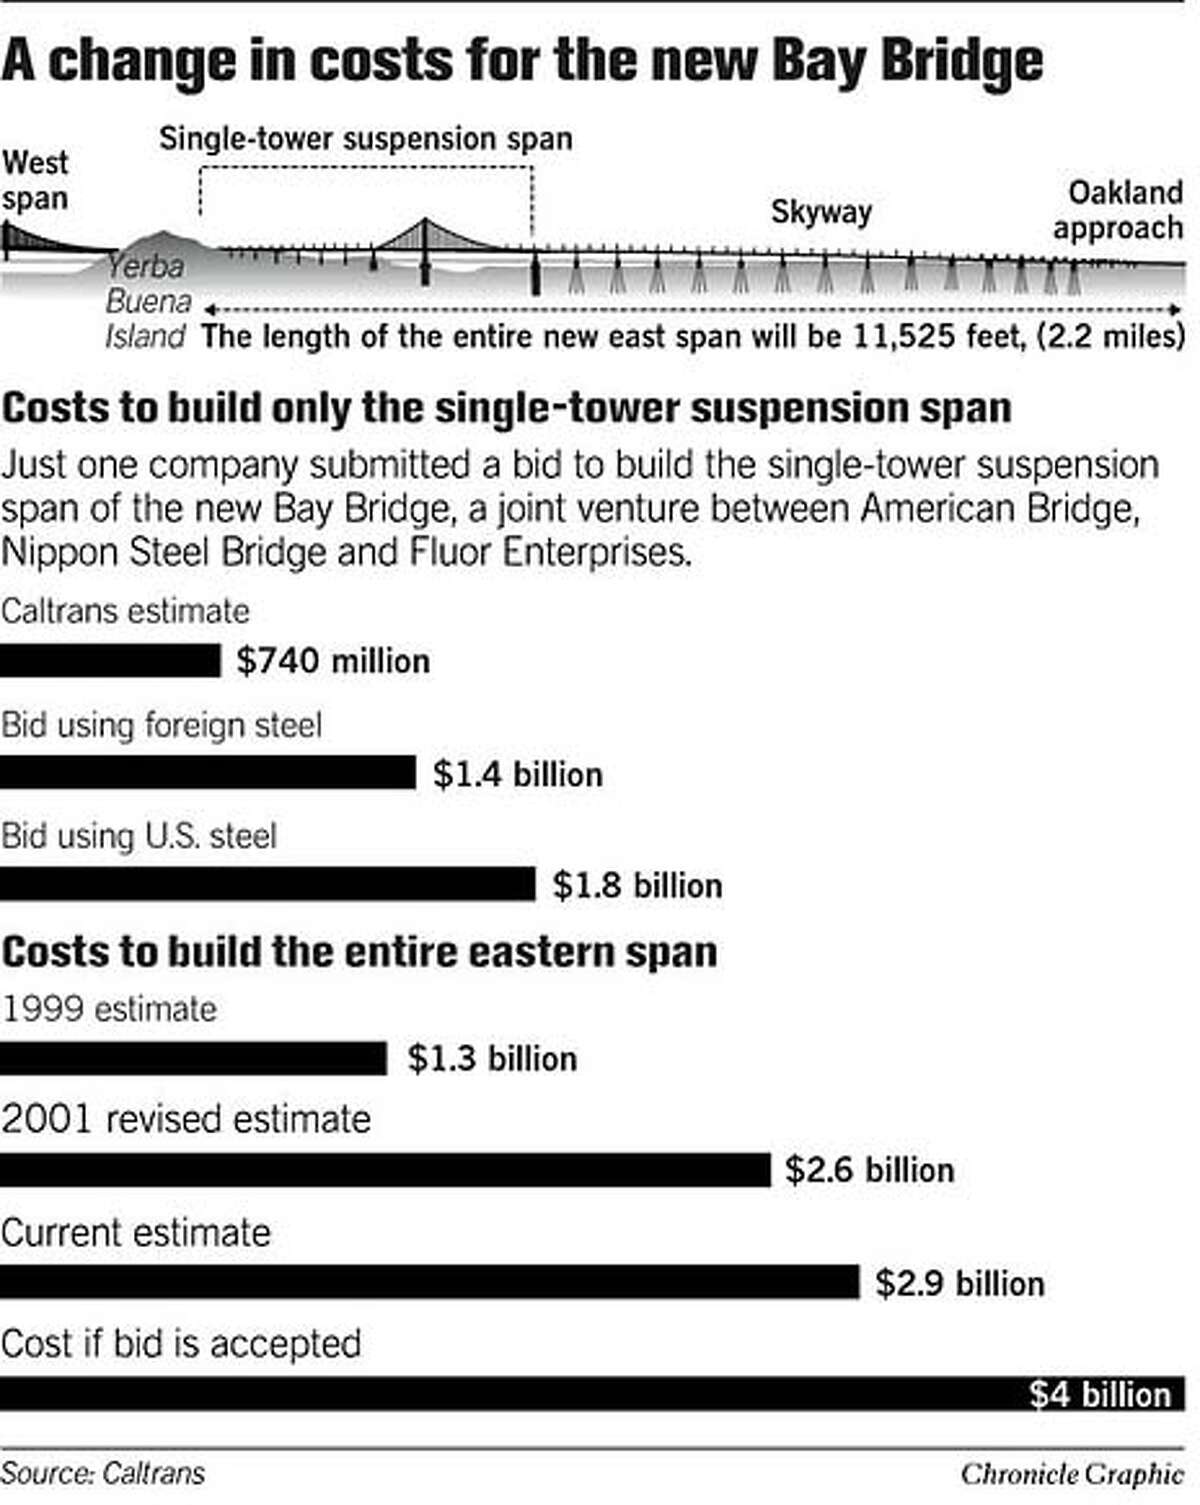 A Change in Costs For the New Bay Bridge. Chronicle Graphic